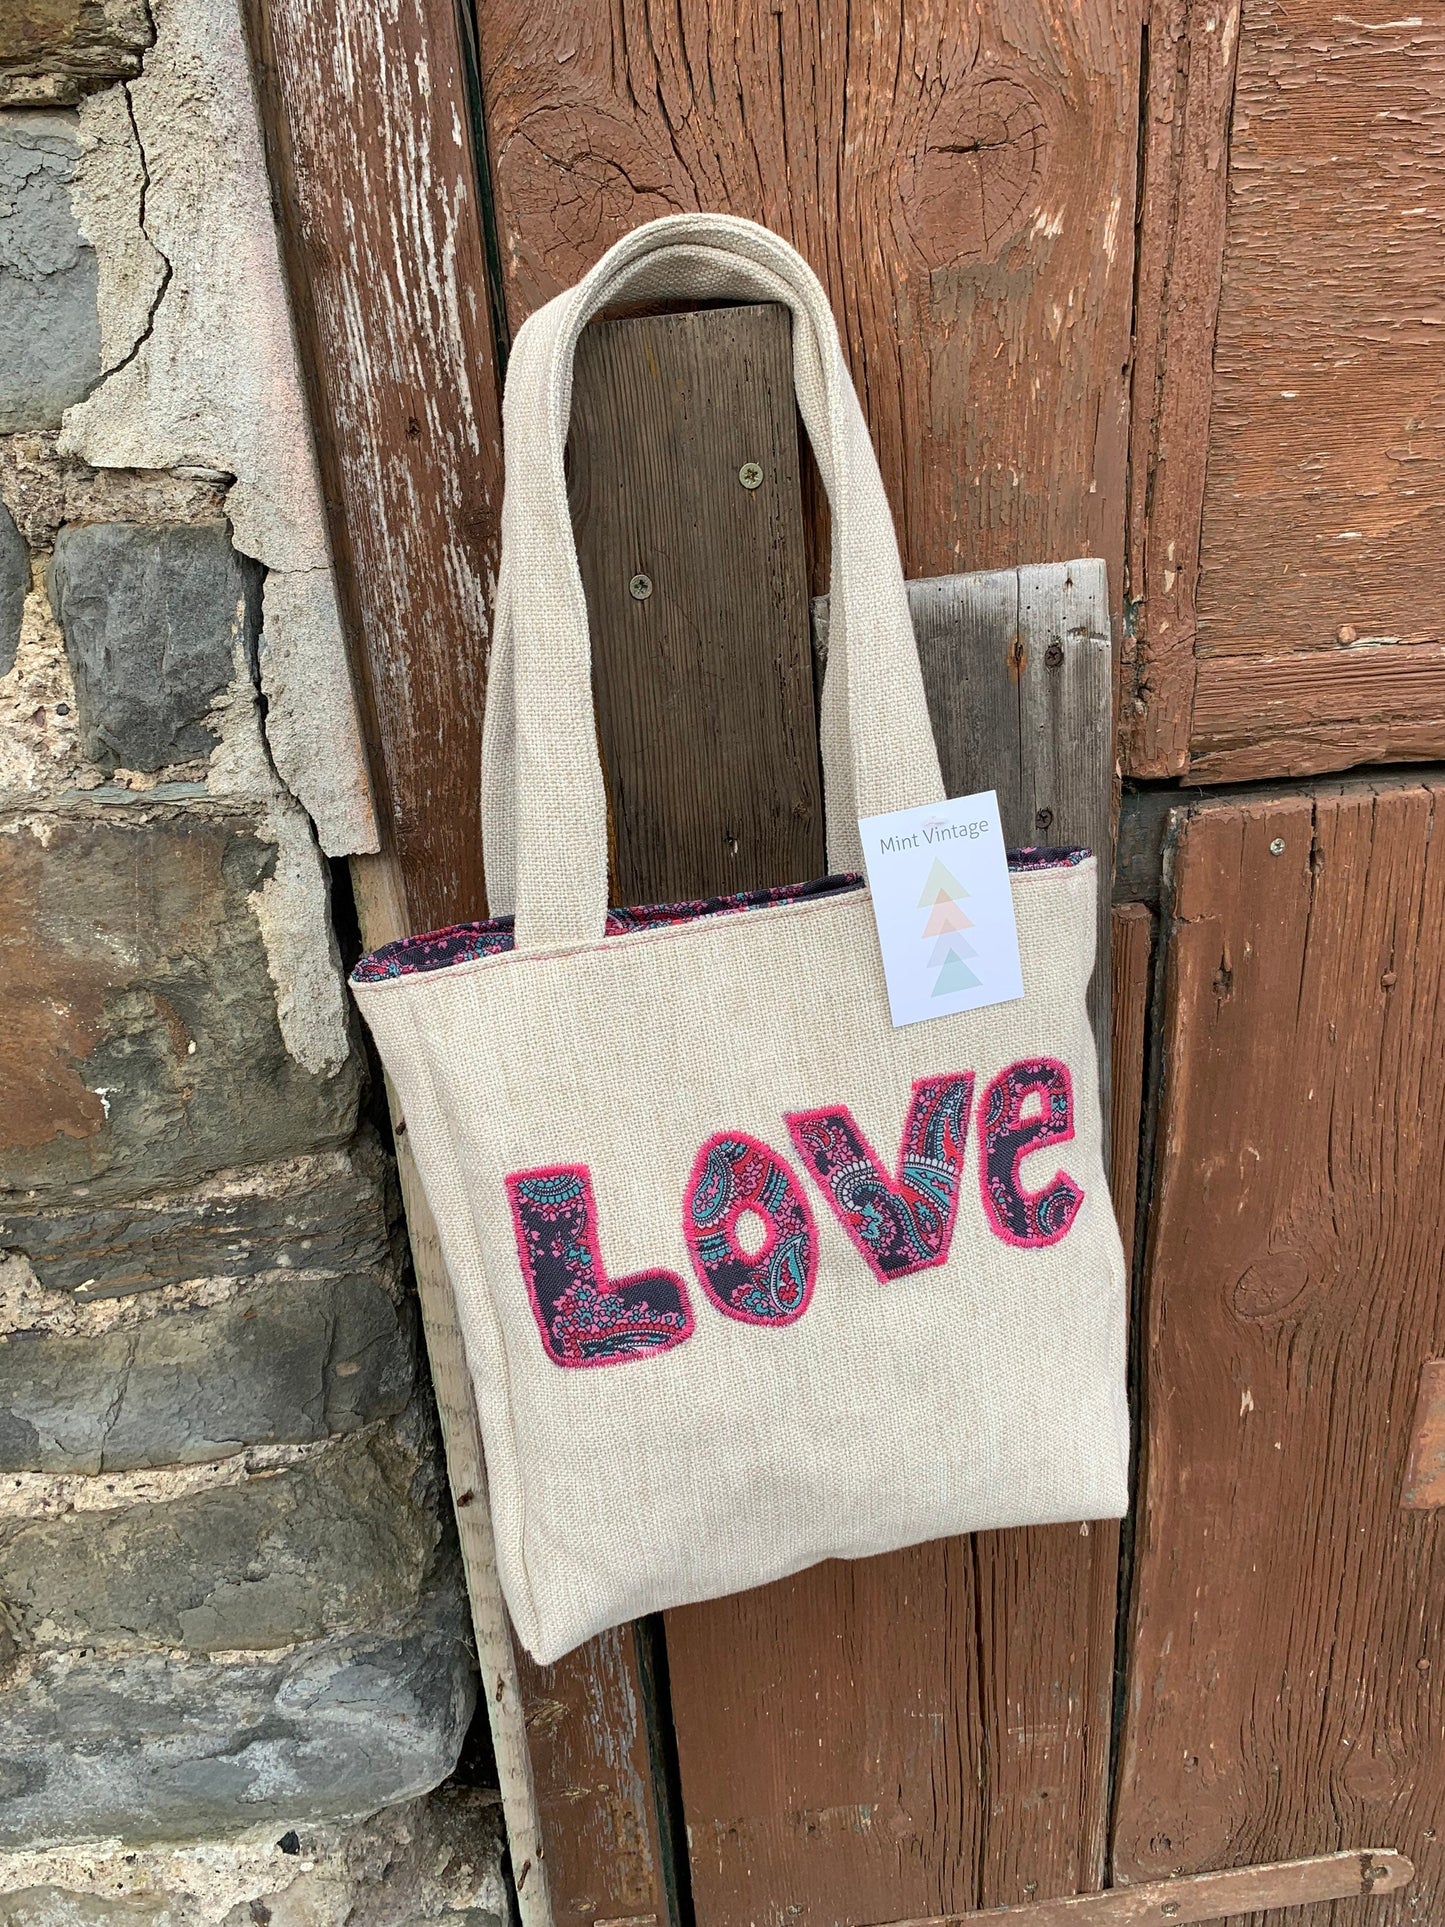 Handmade appliqué LOVE tote bag made from repurposed vintage textiles